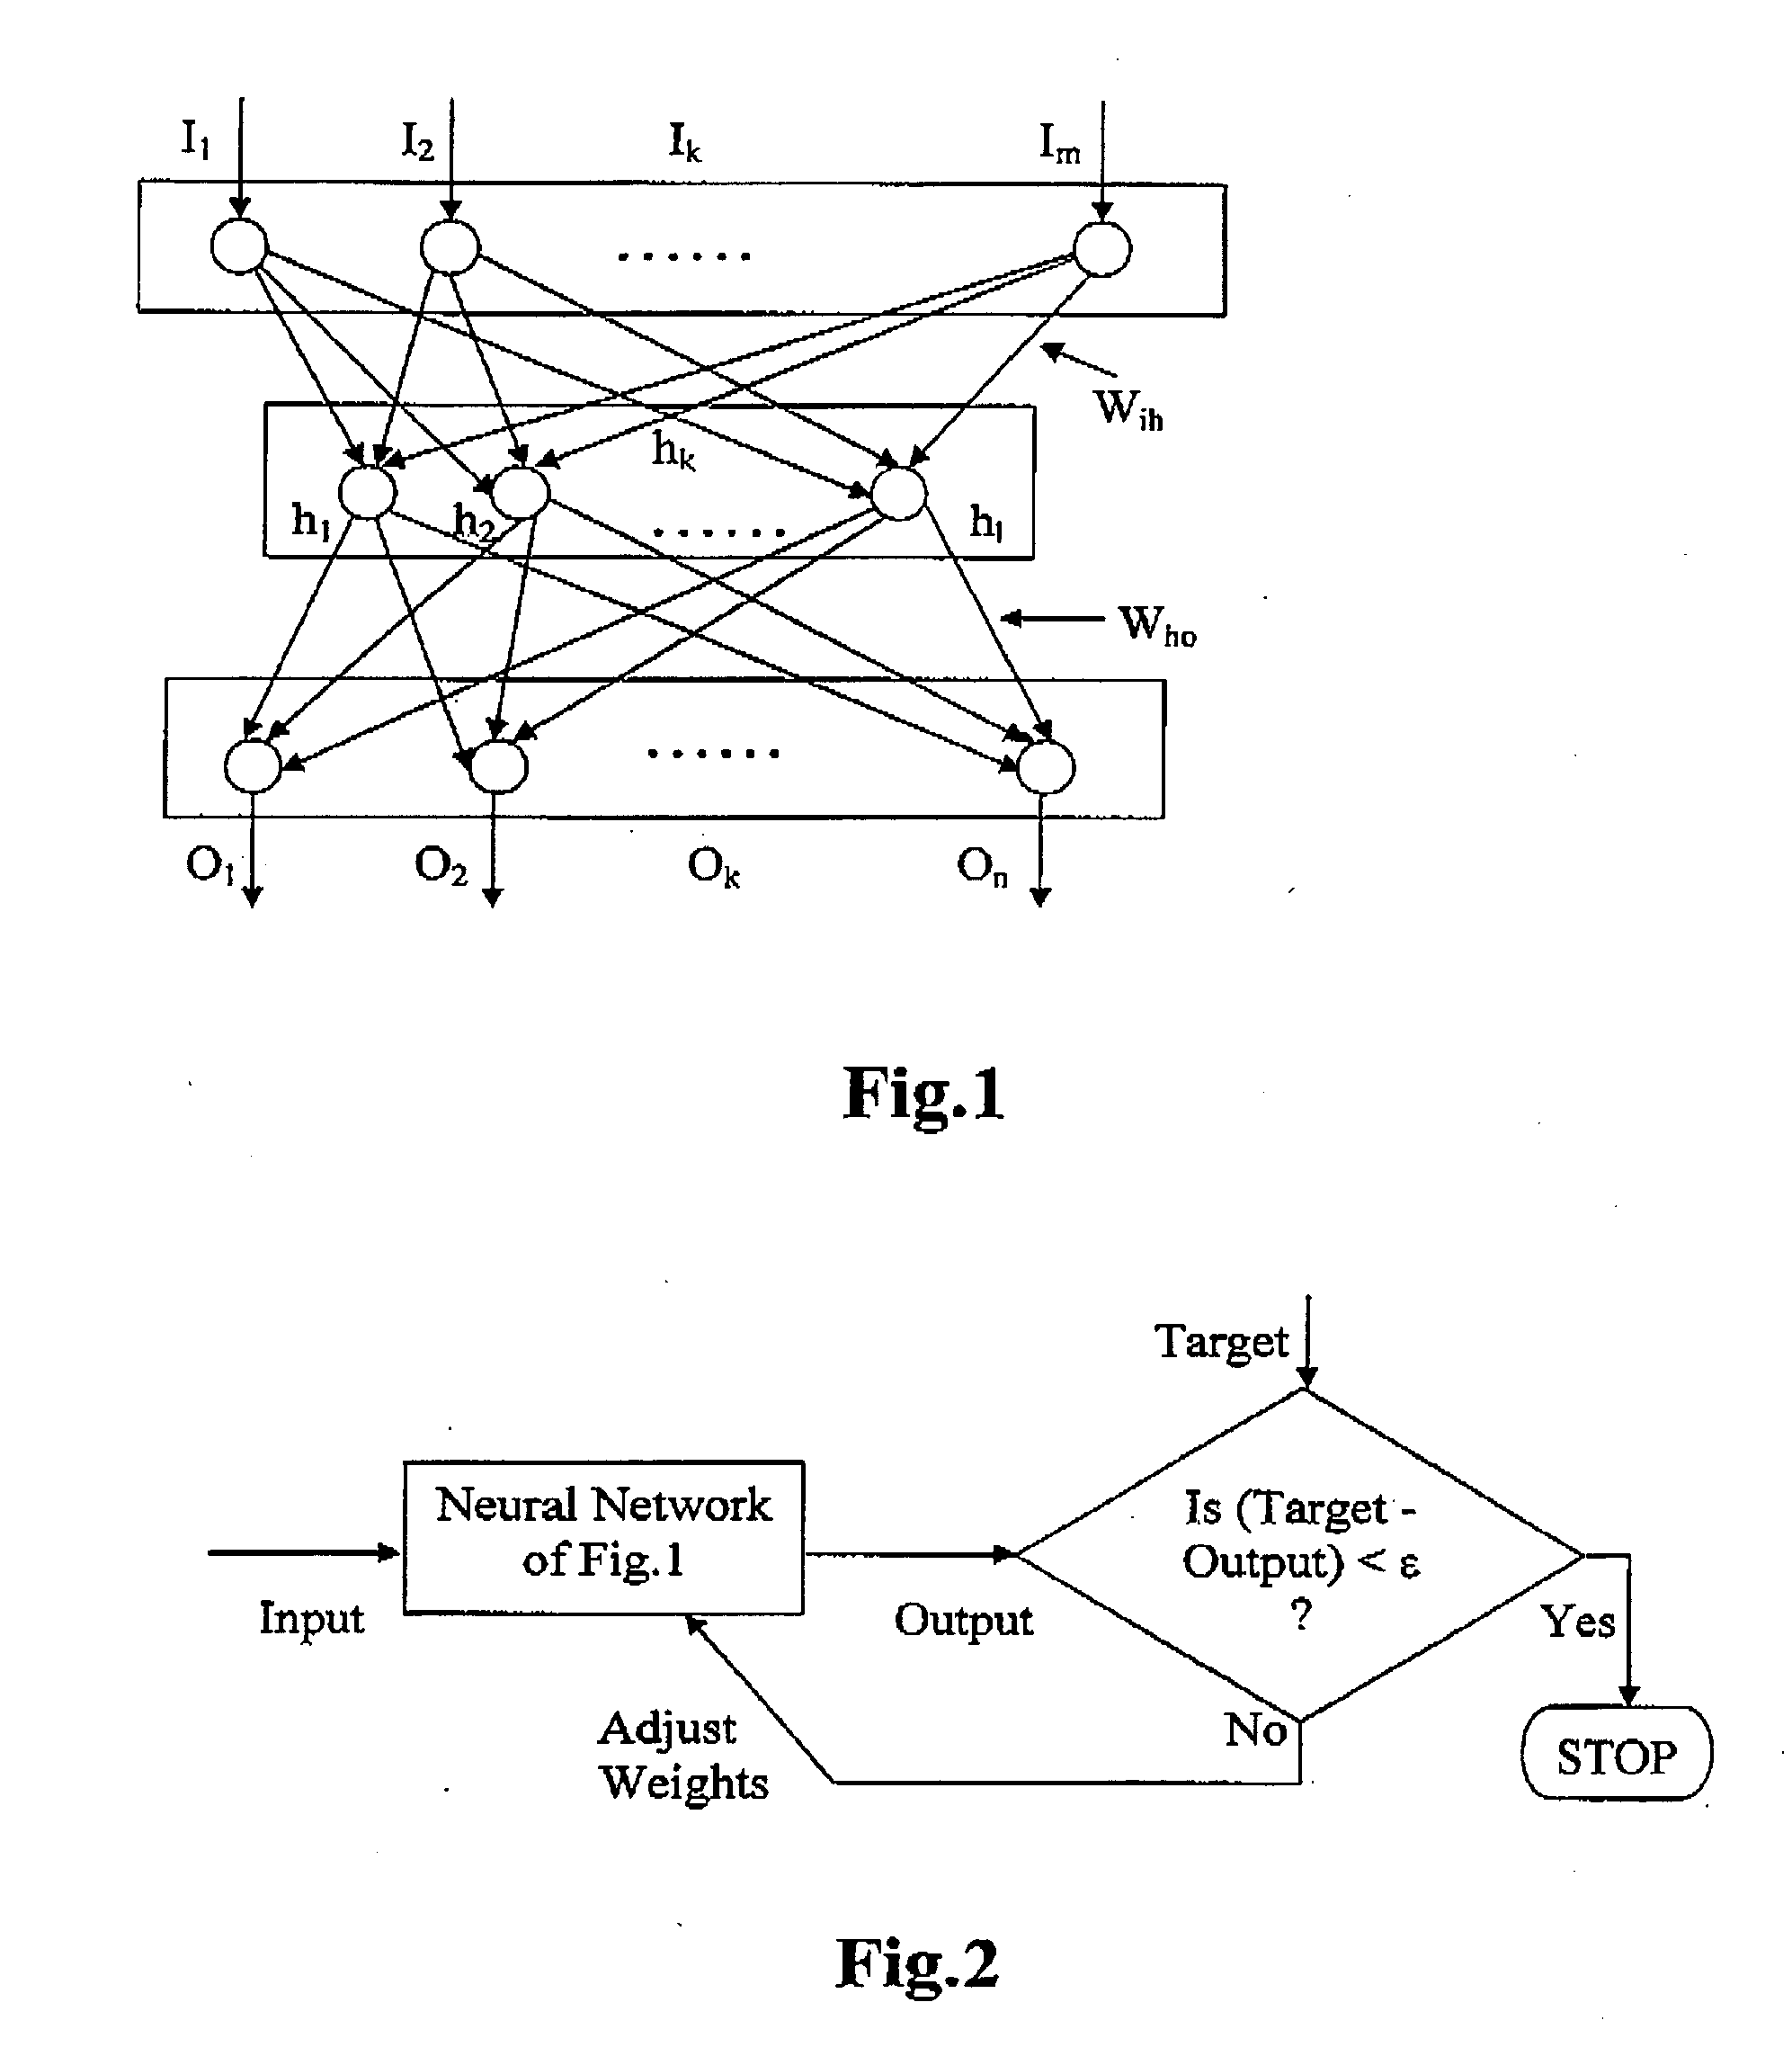 Method of Artificial Nueral Network Loadflow computation for electrical power system